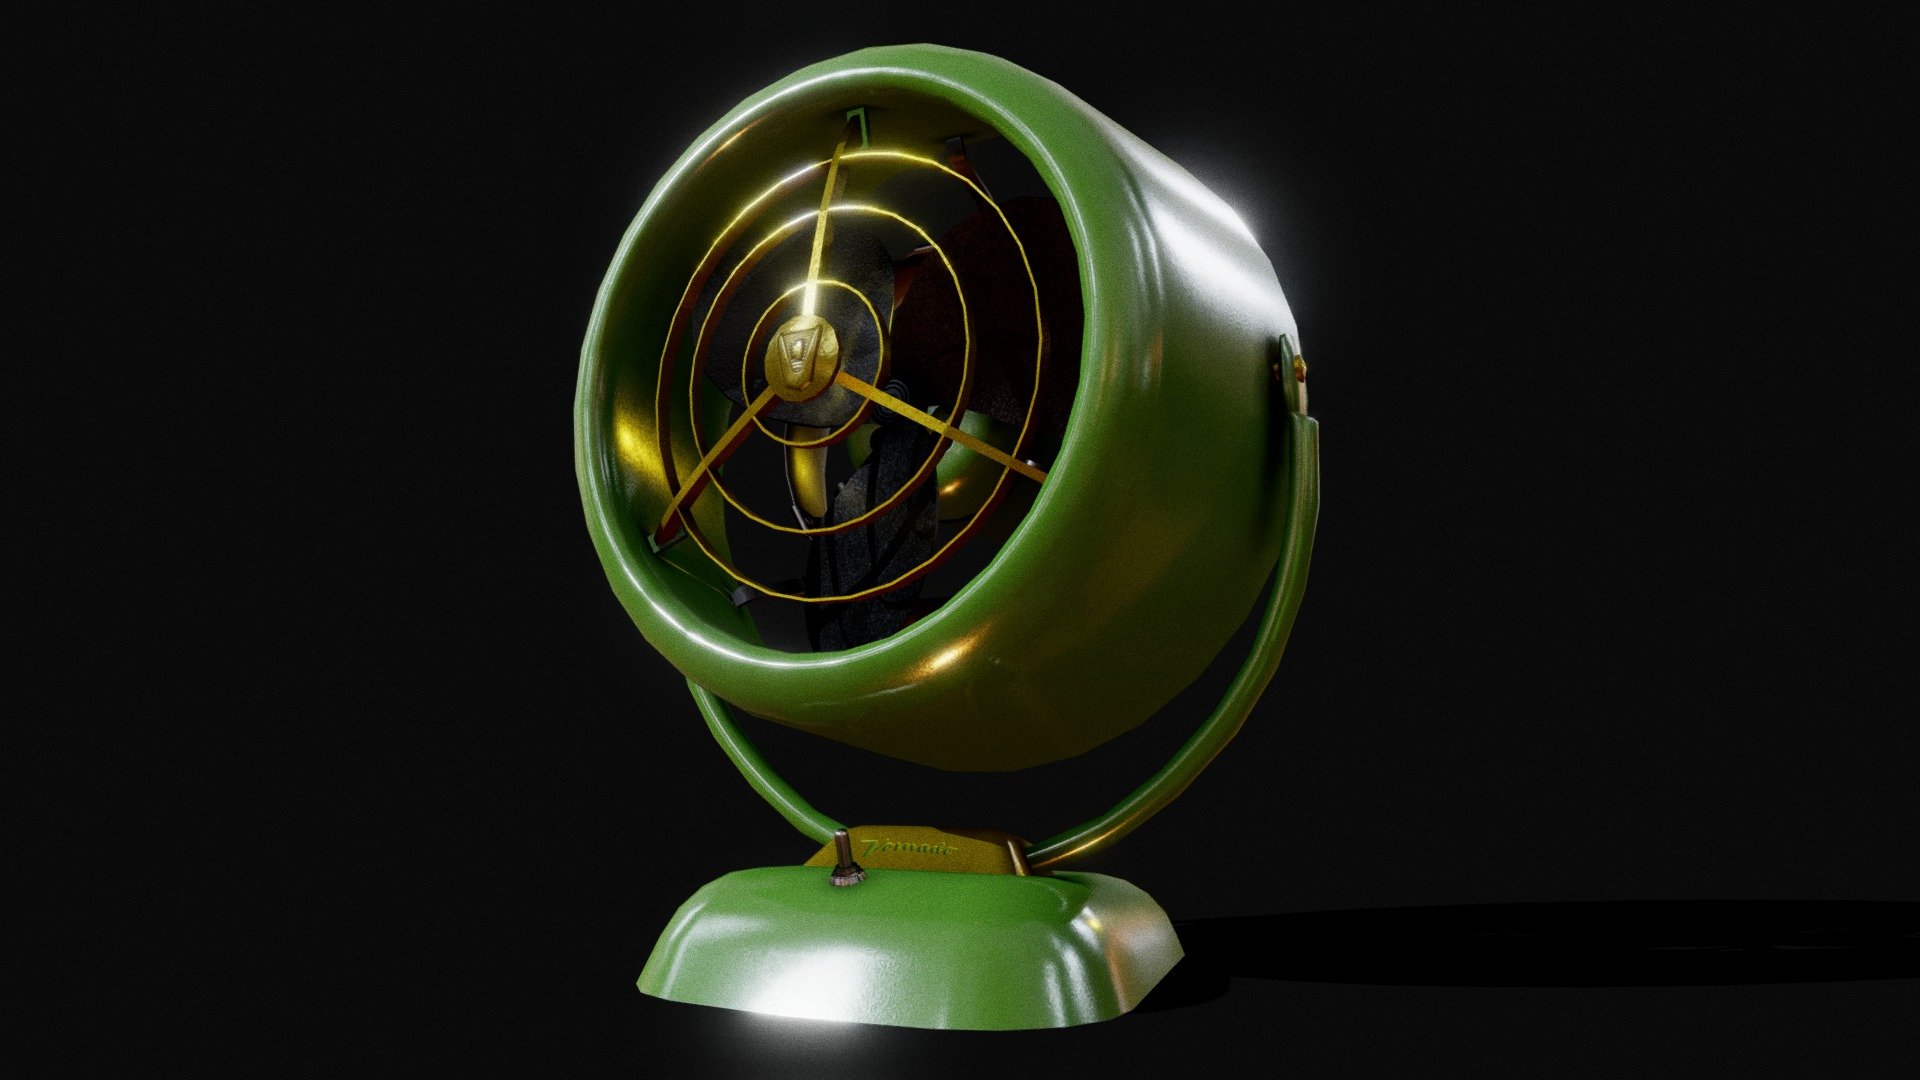 Vintage Vornado Fan from the 1950's.

Low-poly version, which I made in Maya, baked in Marmoset, textured with Substance Painter and Photoshop - Sway with me - 3D model by pan.stasian (@pan_stasian) 3d model